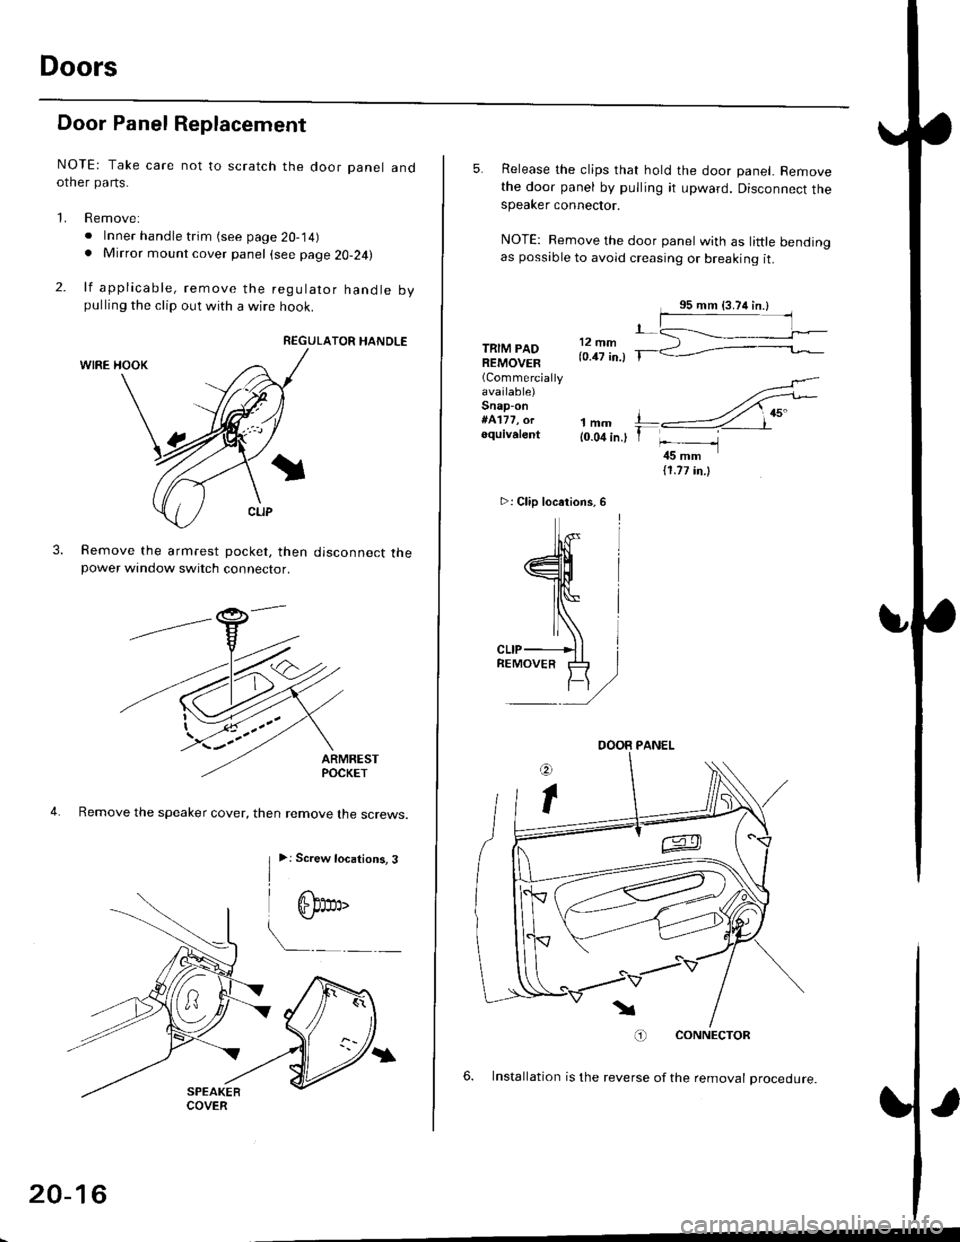 HONDA CIVIC 1999 6.G Workshop Manual Doors
Door Panel Replacement
NOTE: Take care not to scratch the door panel andother pa rts.
1. Remove:
. Inner handle trim (see page 20-14). Mirror mount cover panel (see page 20-24)
2. lf applicable